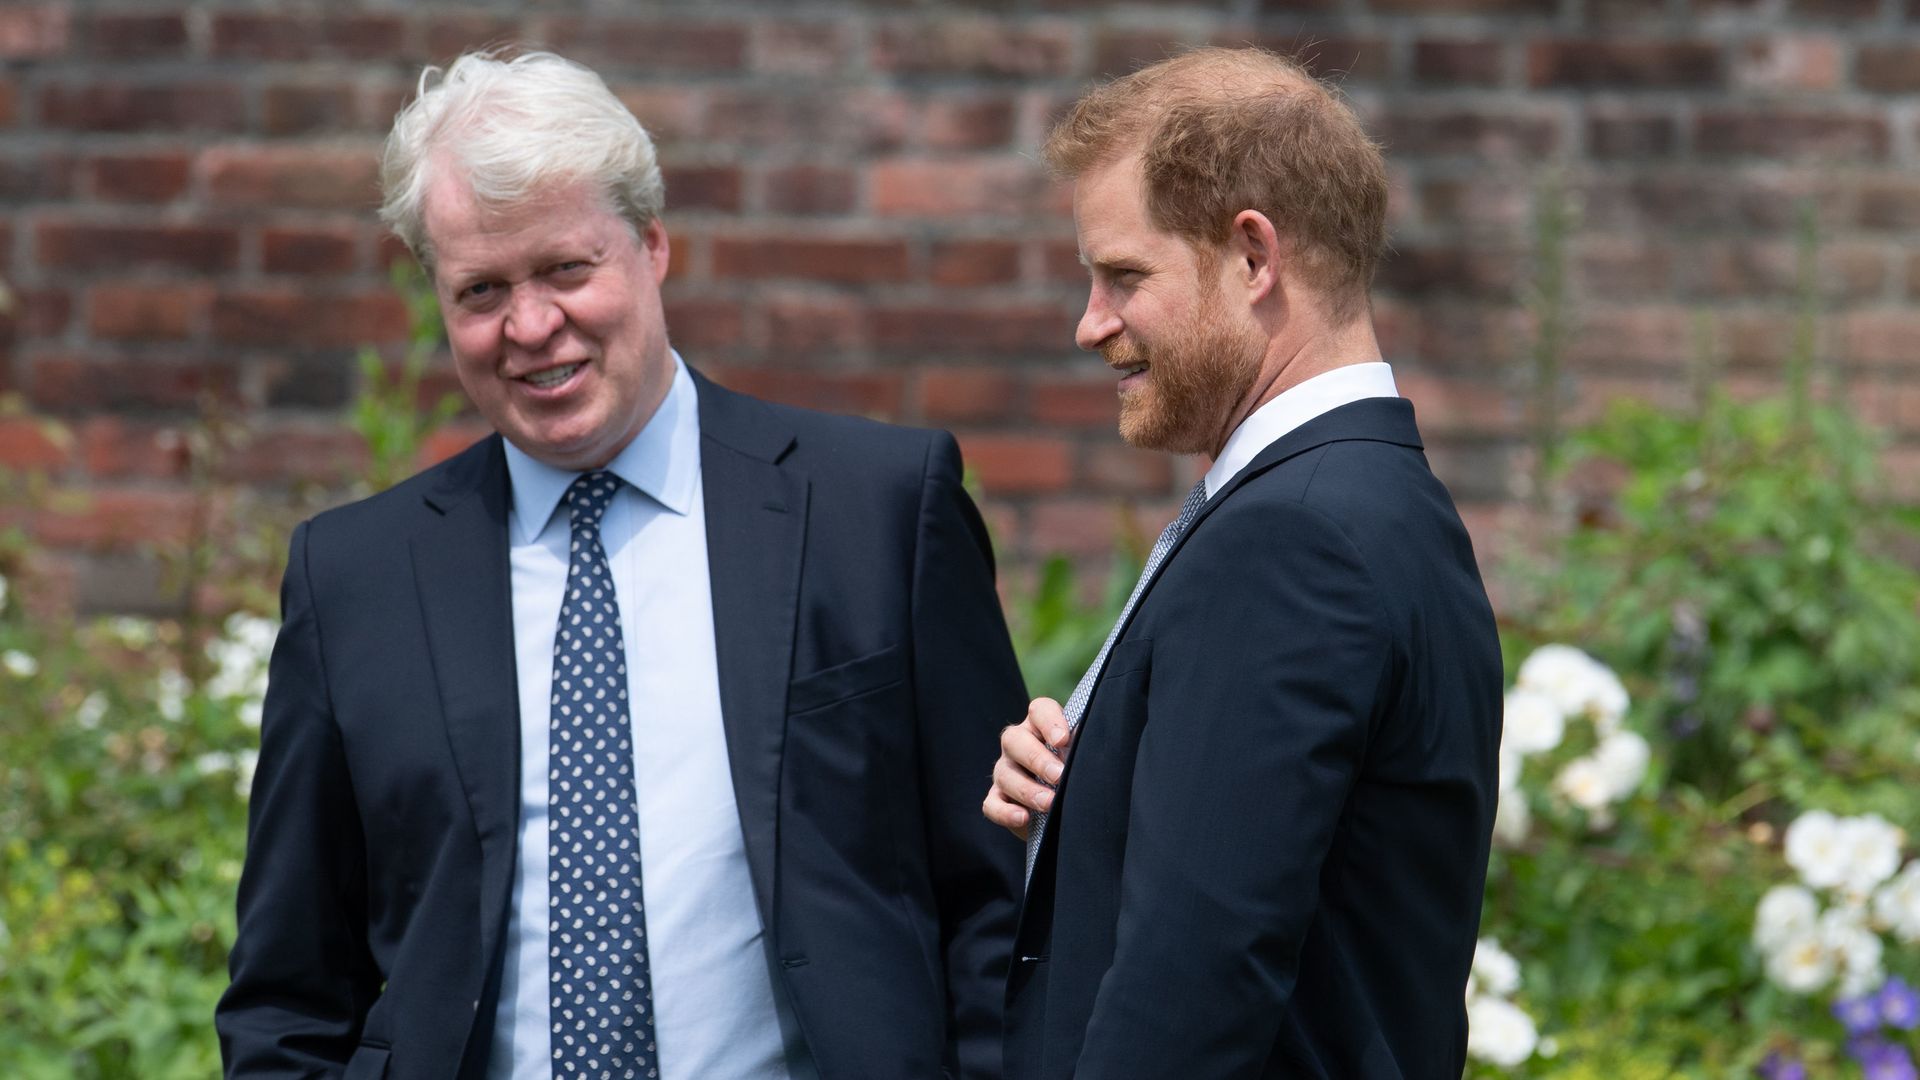 Prince Harry supported by uncle Charles Spencer at Invictus ceremony in London